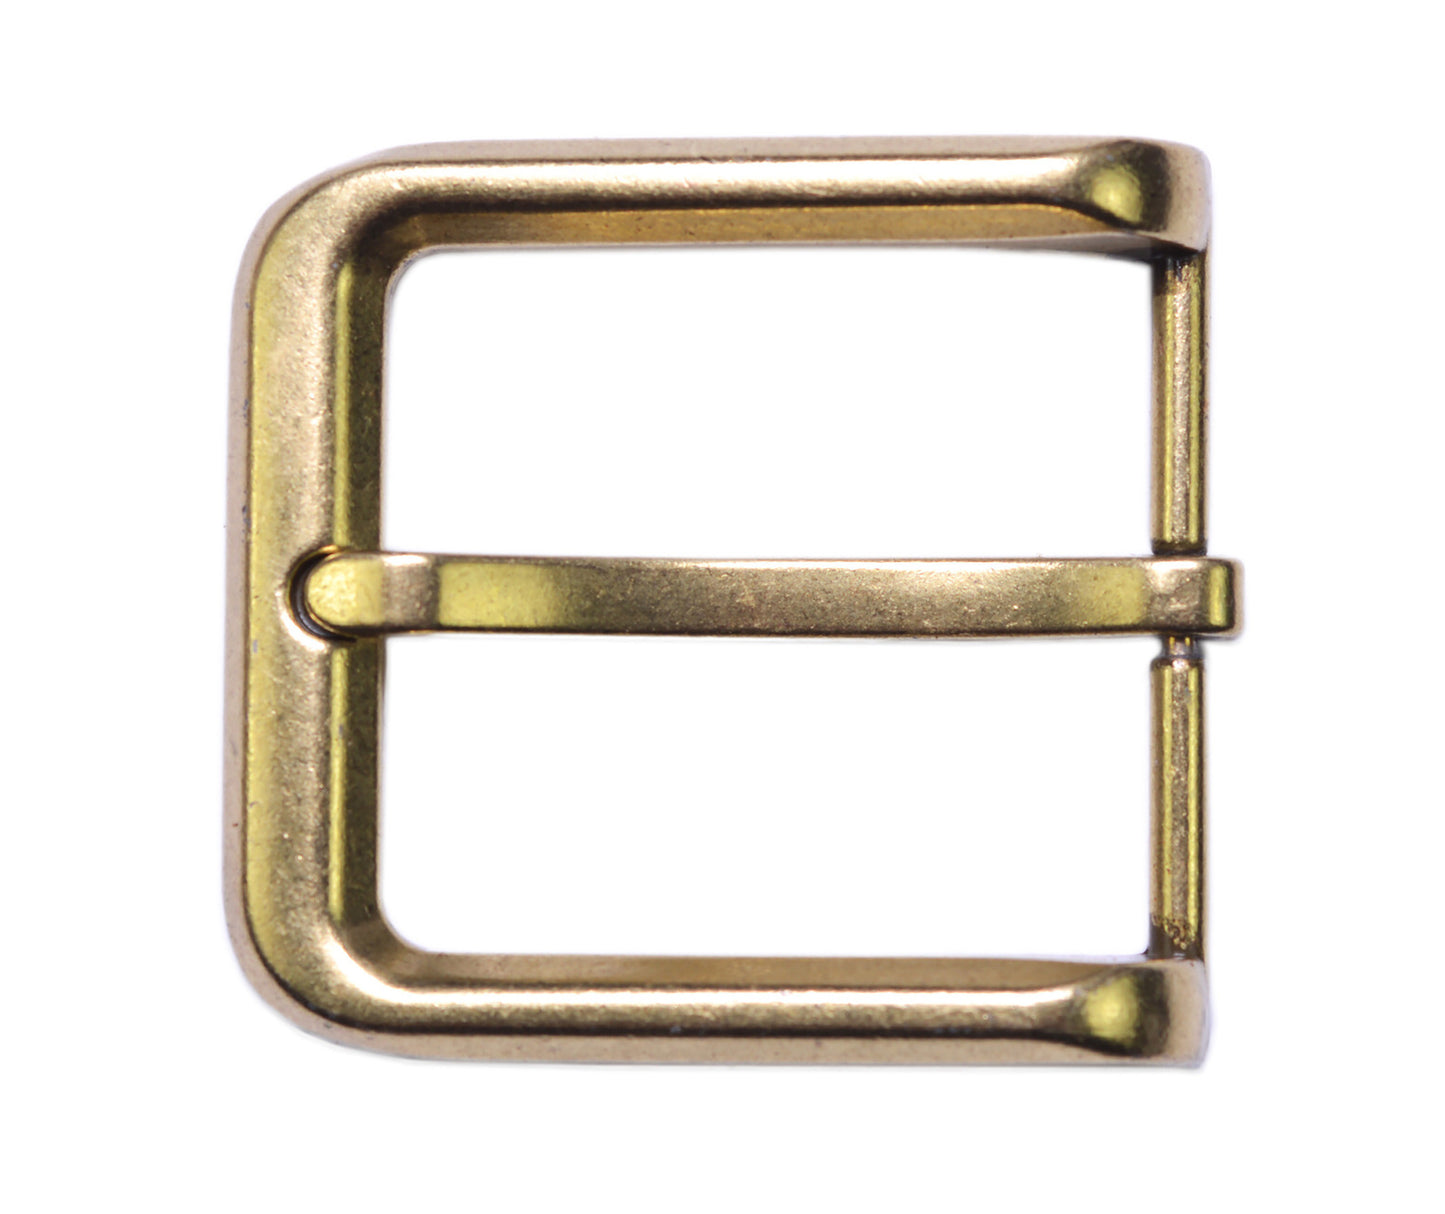 TBS-BU3123 - Bronze Polished Pin Buckle Fits 1.5" or 38mm Belts